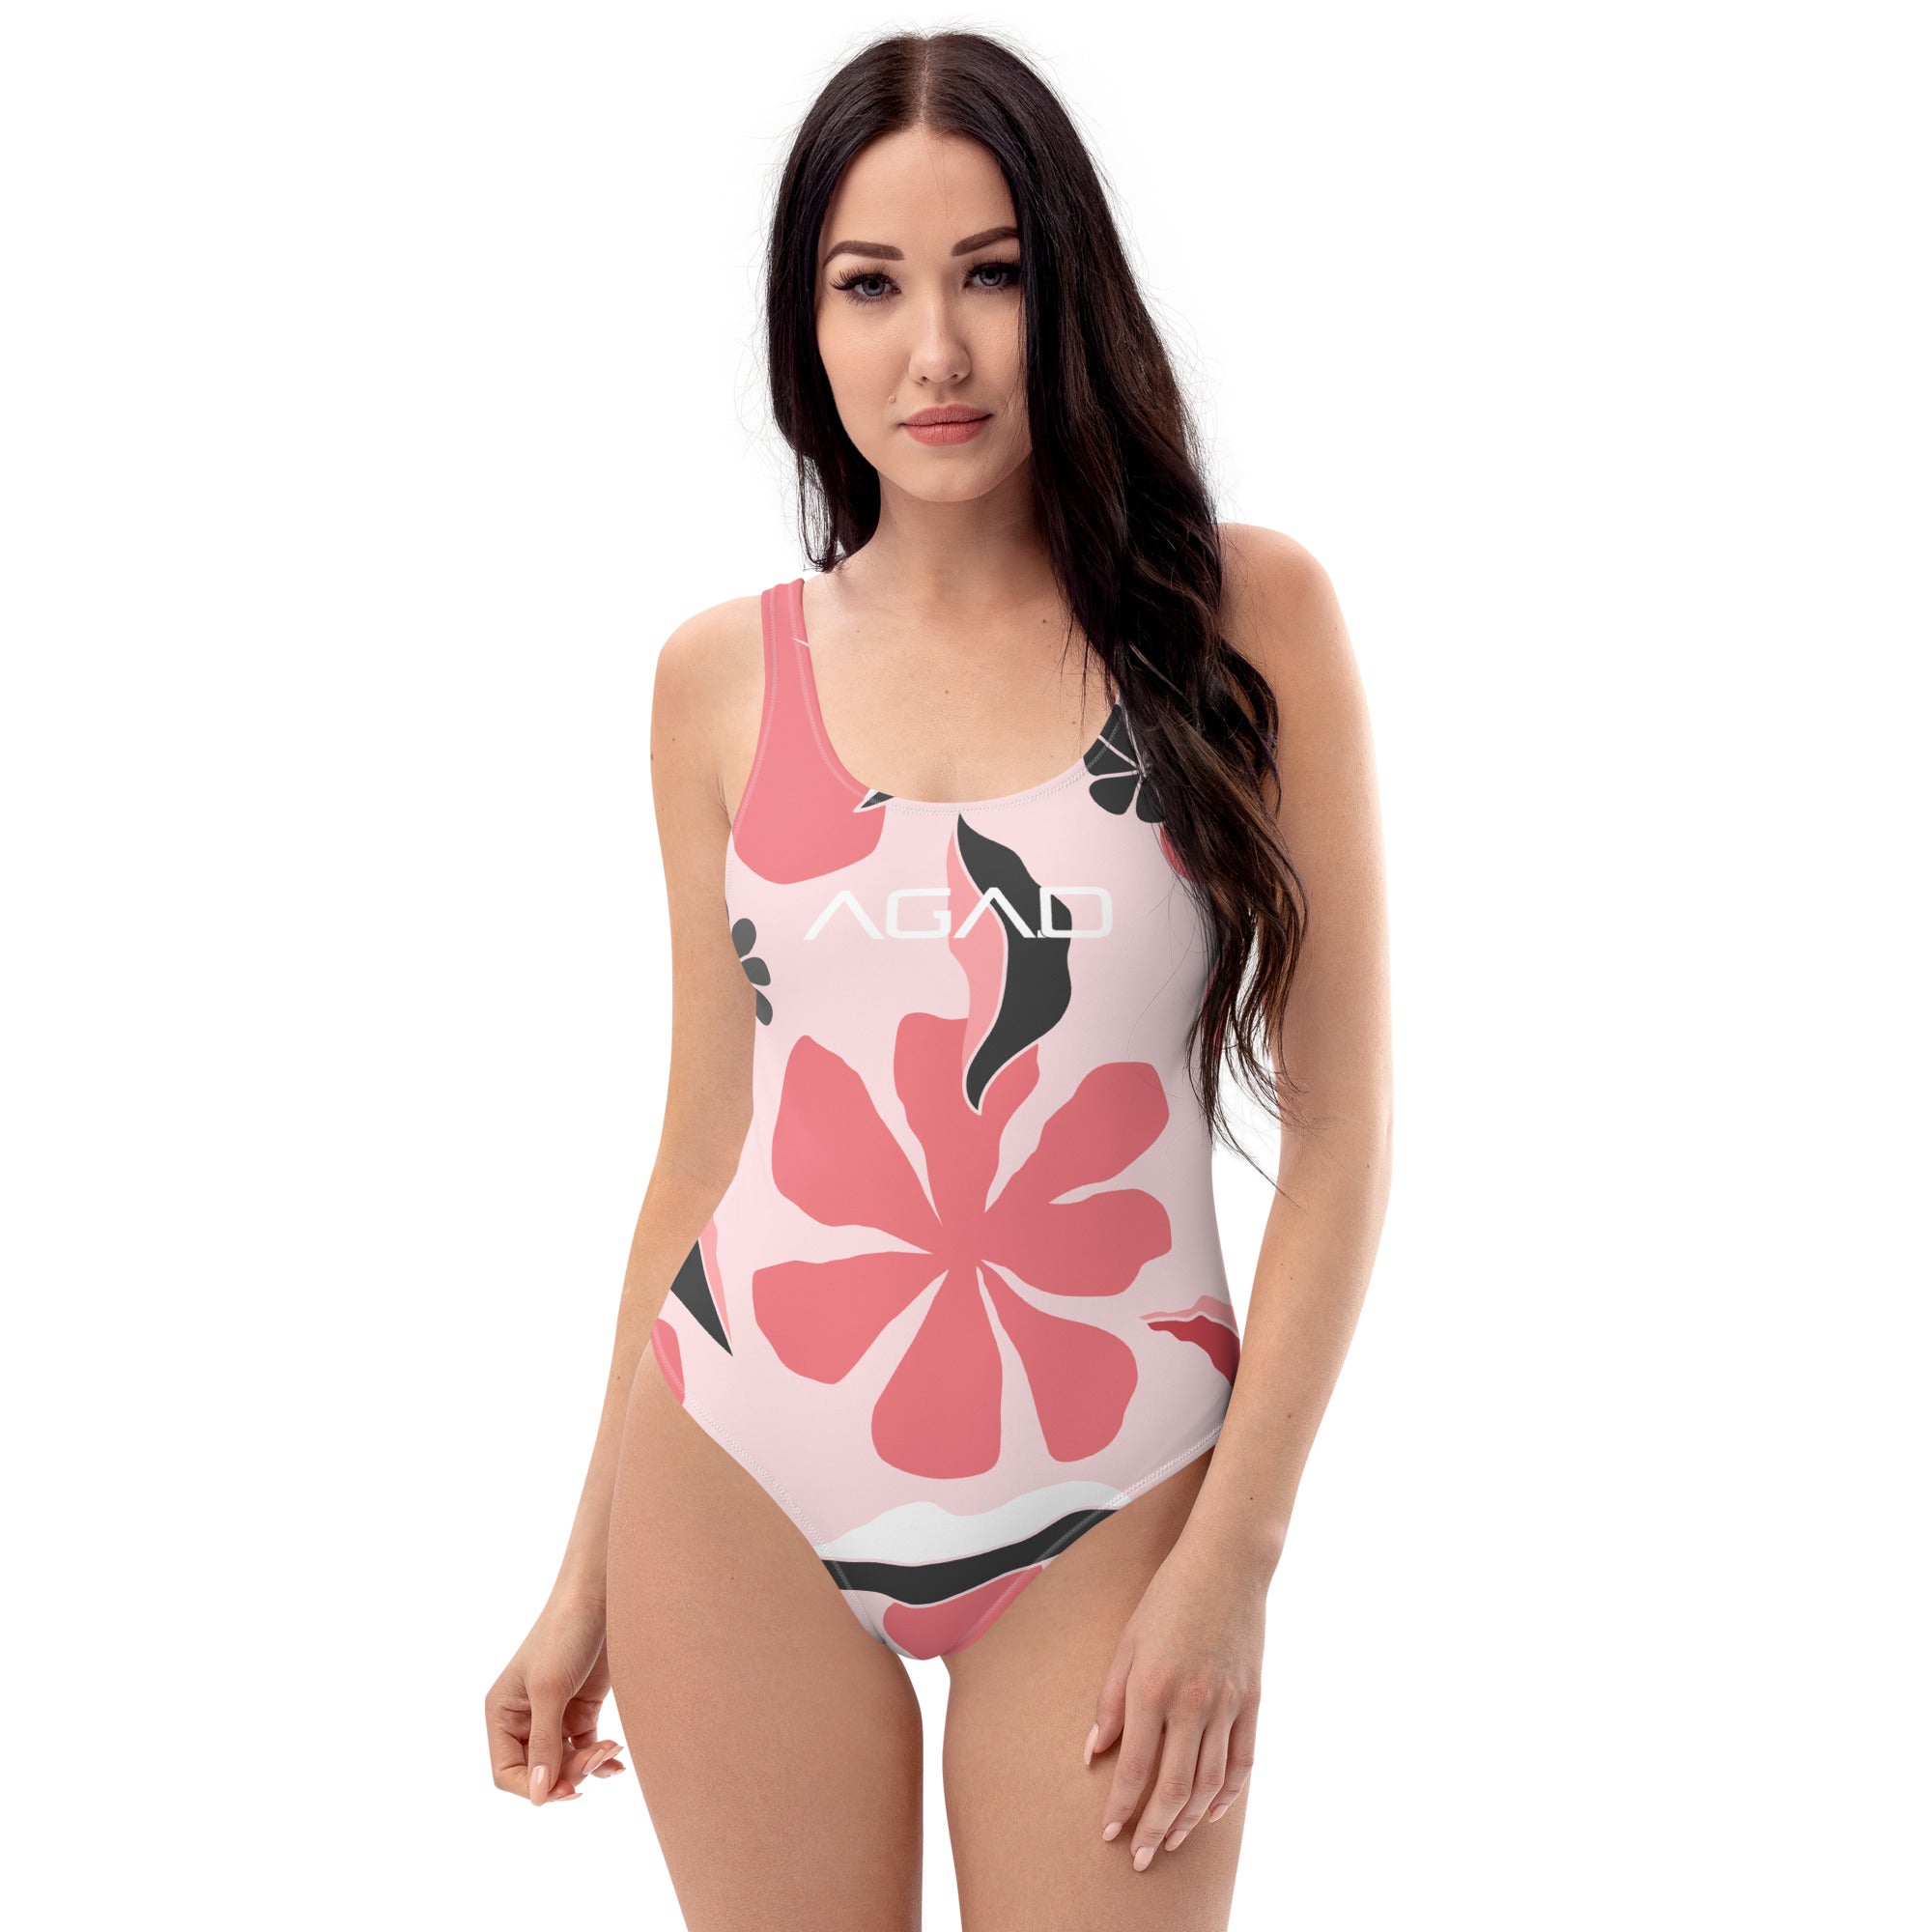 AGAD Summer 24 (Lily) One-Piece Swimsuit